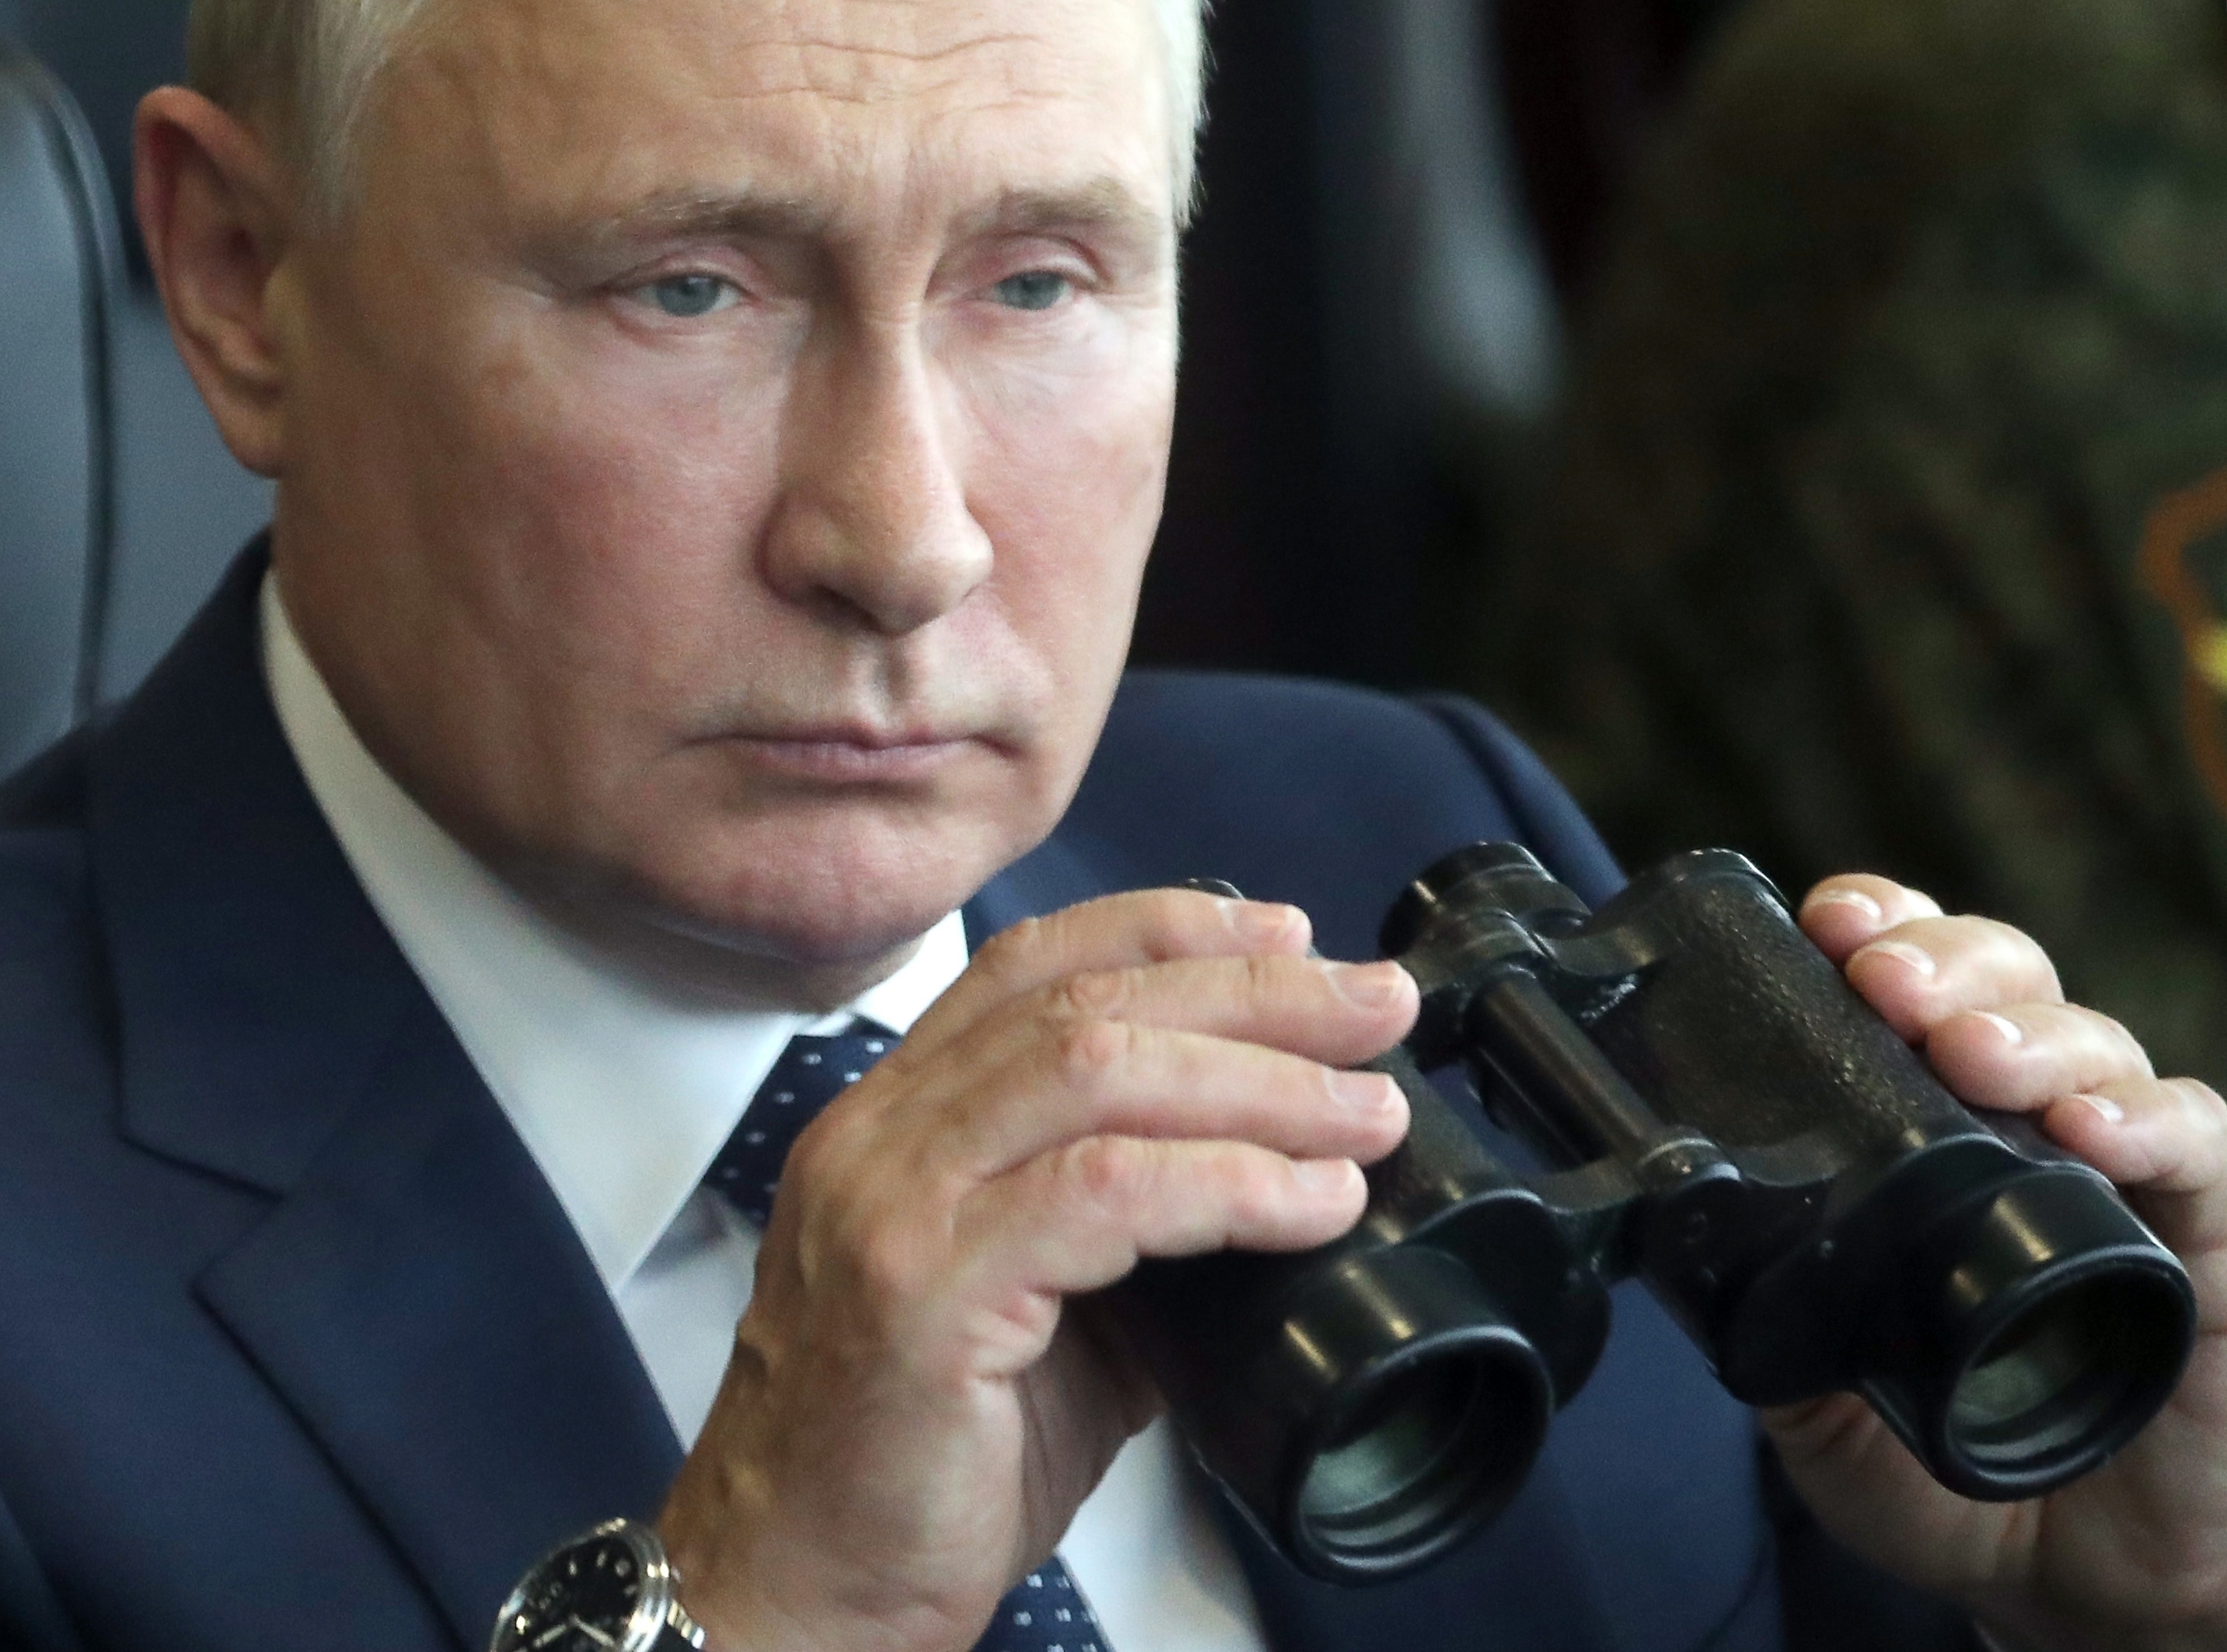 Russian President Vladimir Putin, with a prism